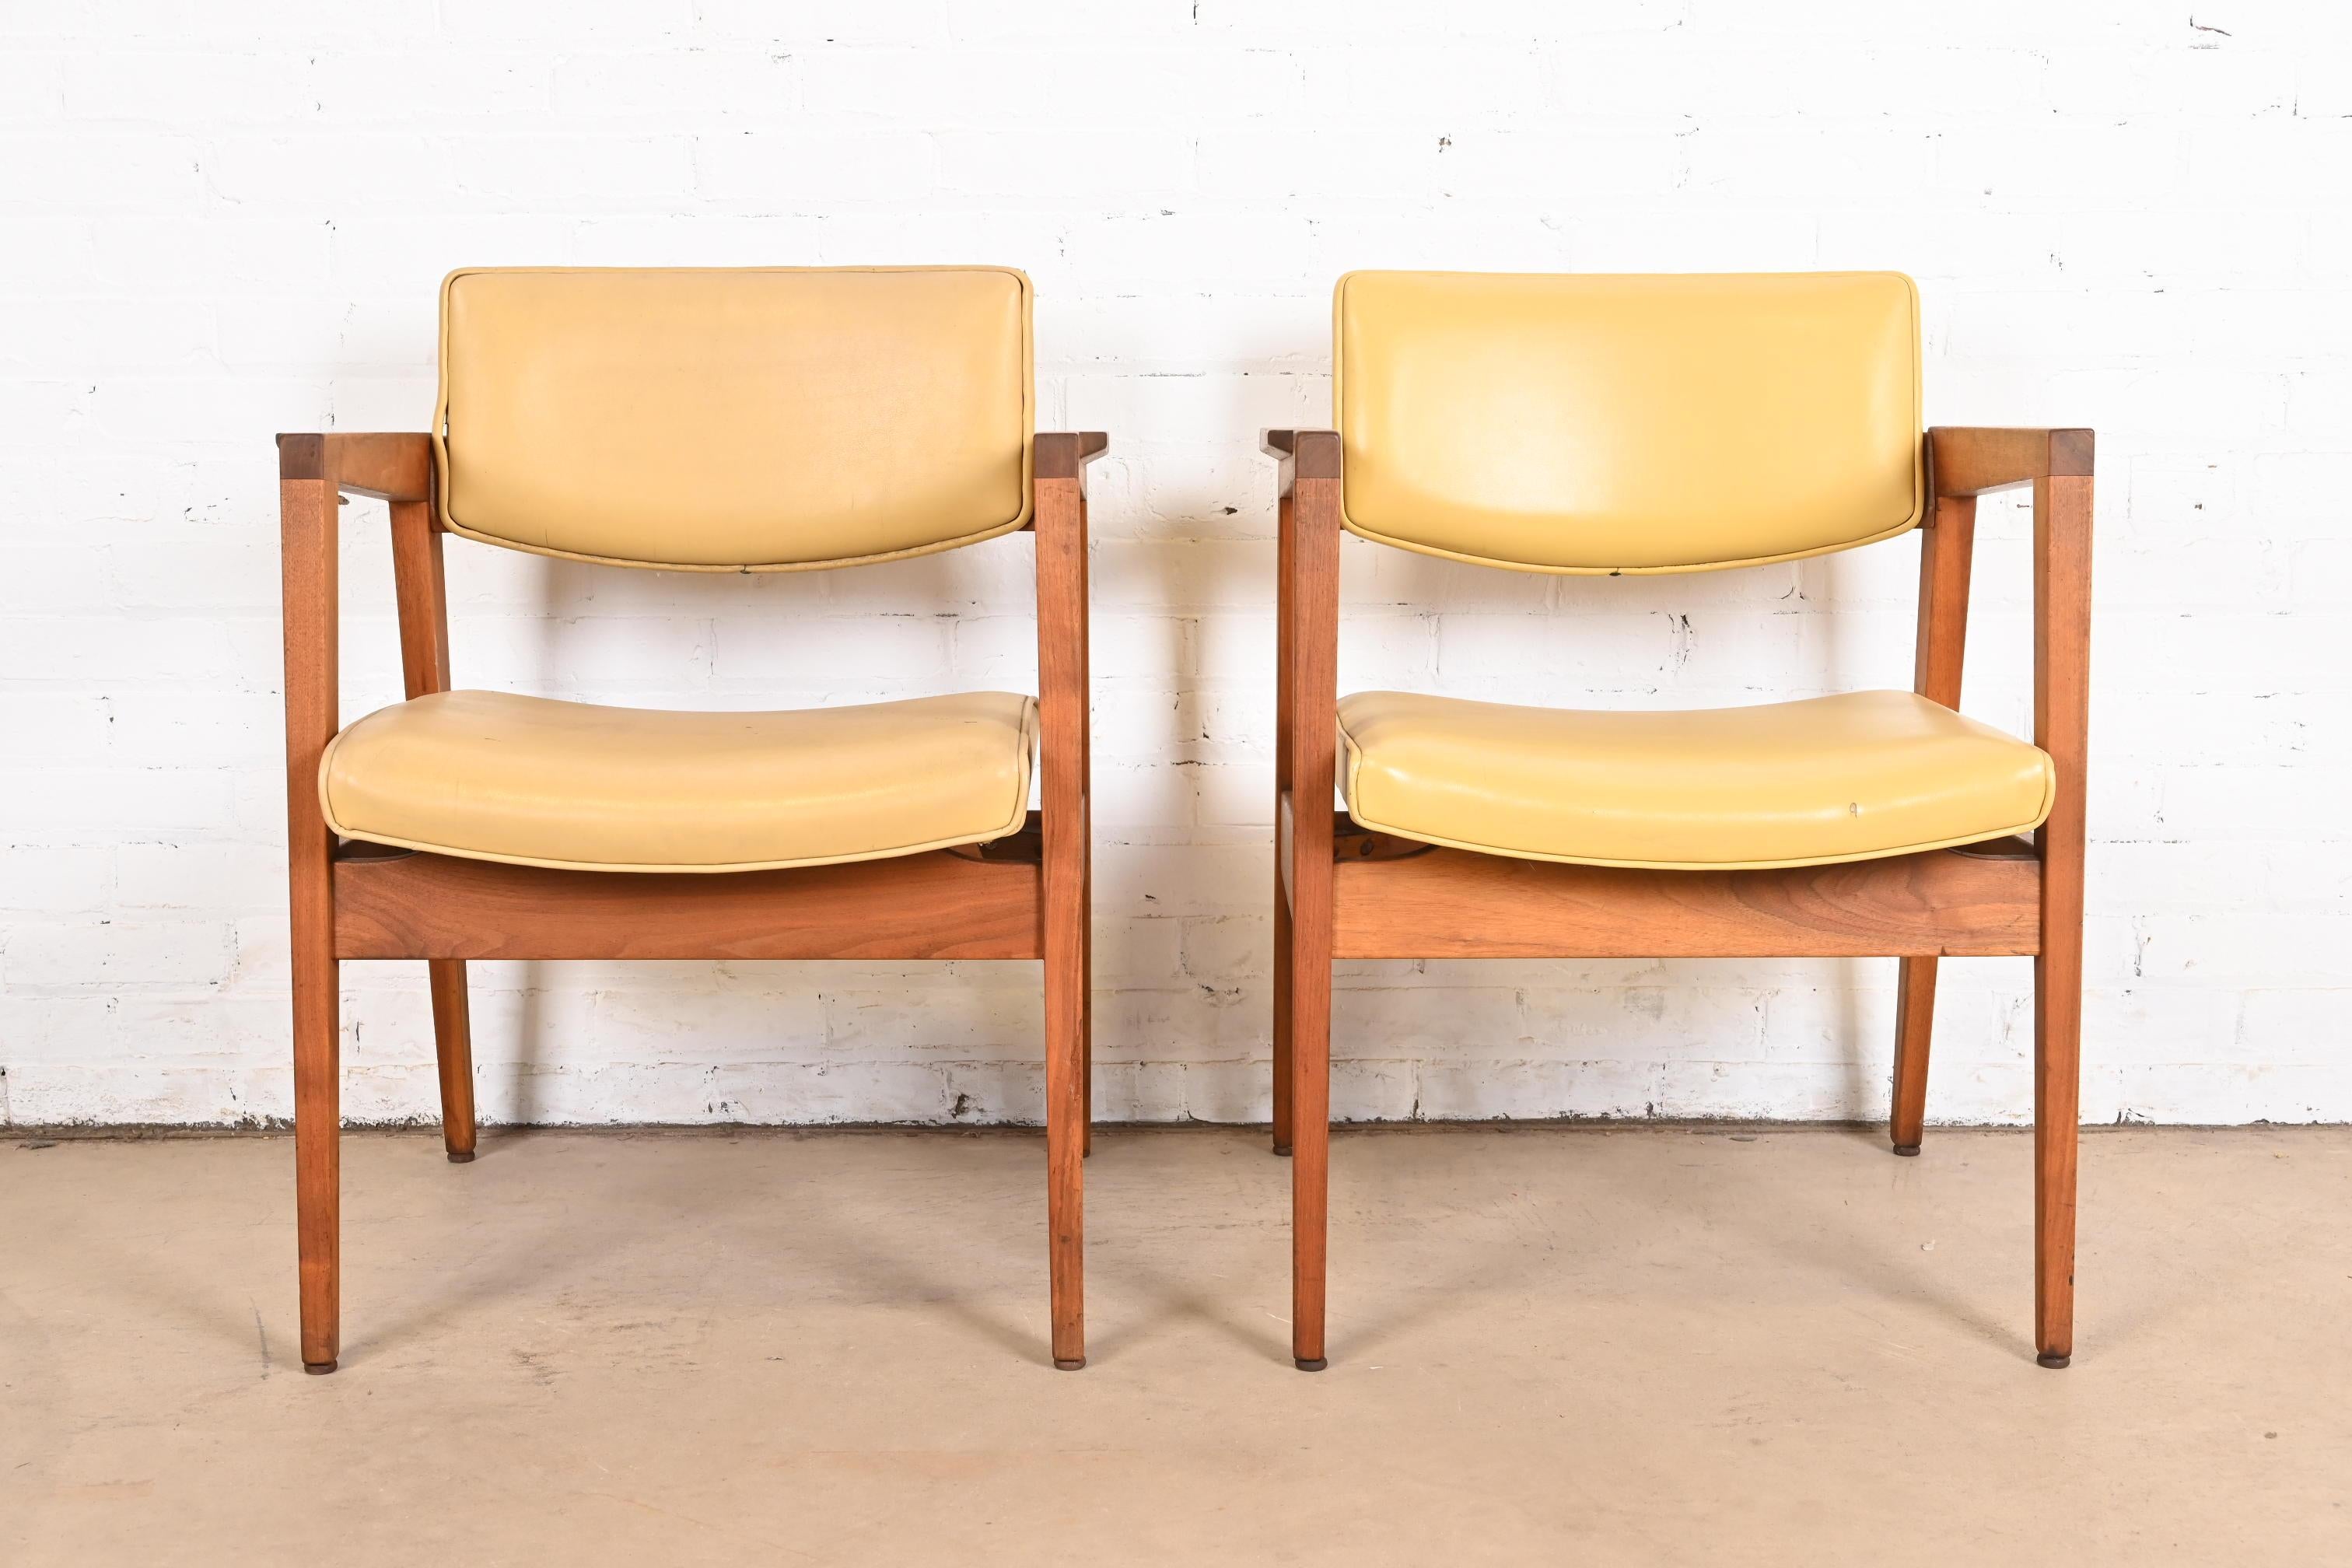 Upholstery Jens Risom Style Mid-Century Modern Solid Walnut Lounge Chairs by Gunlocke, Pair For Sale